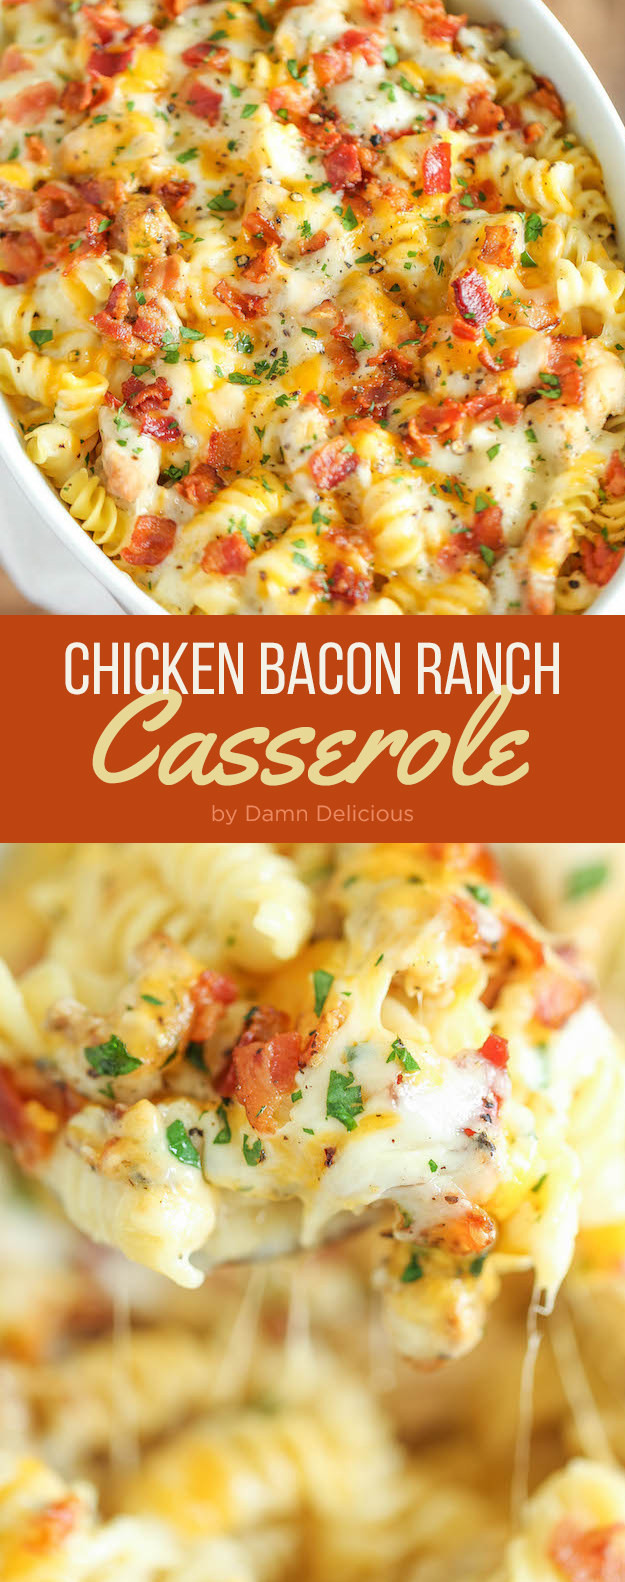 Pinterest Dinner Ideas
 7 Awesome Ideas For Easy Weeknight Dinners